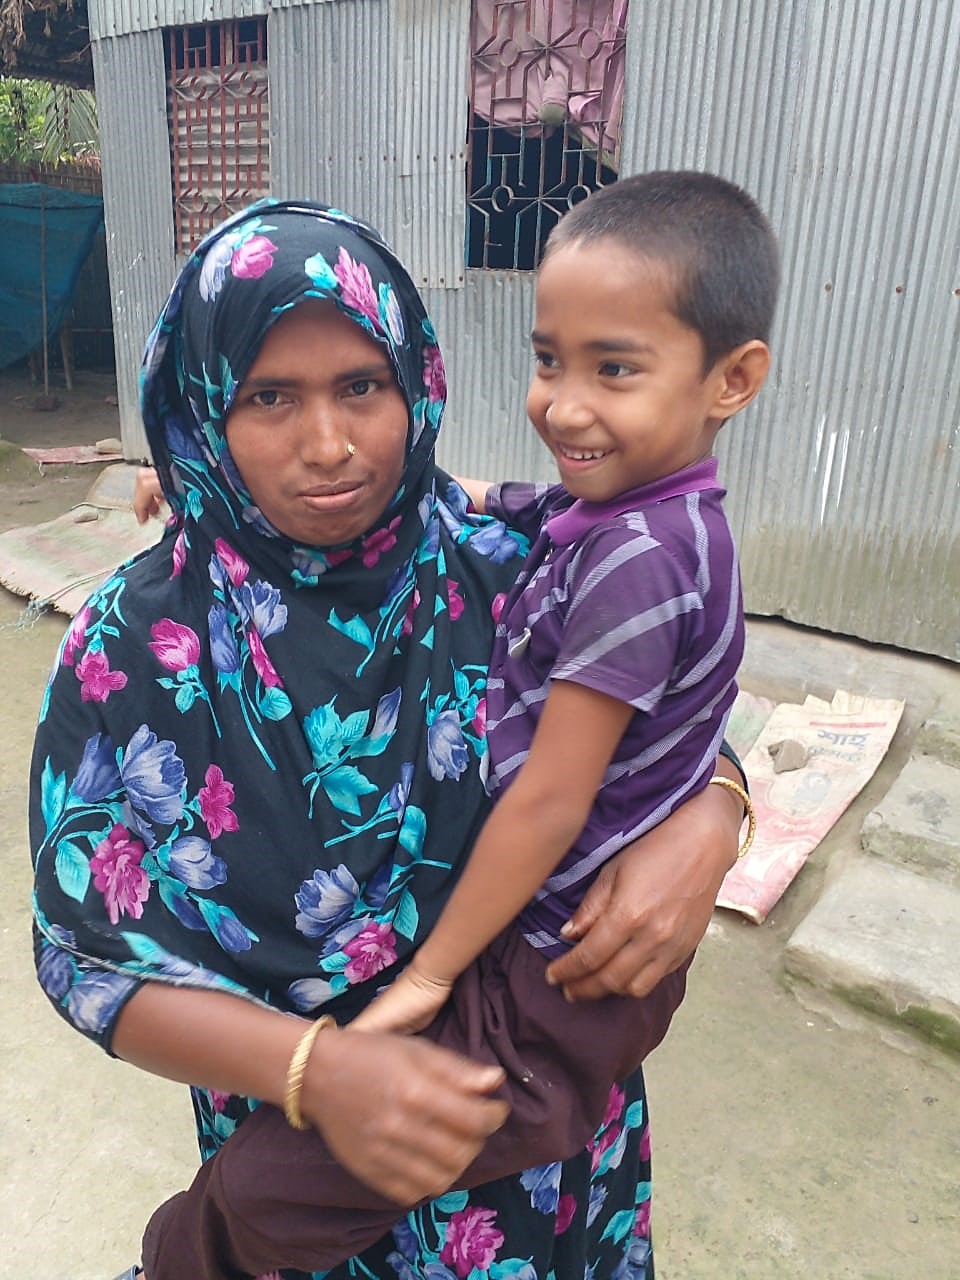 A young child smiles as he is held by his mother.